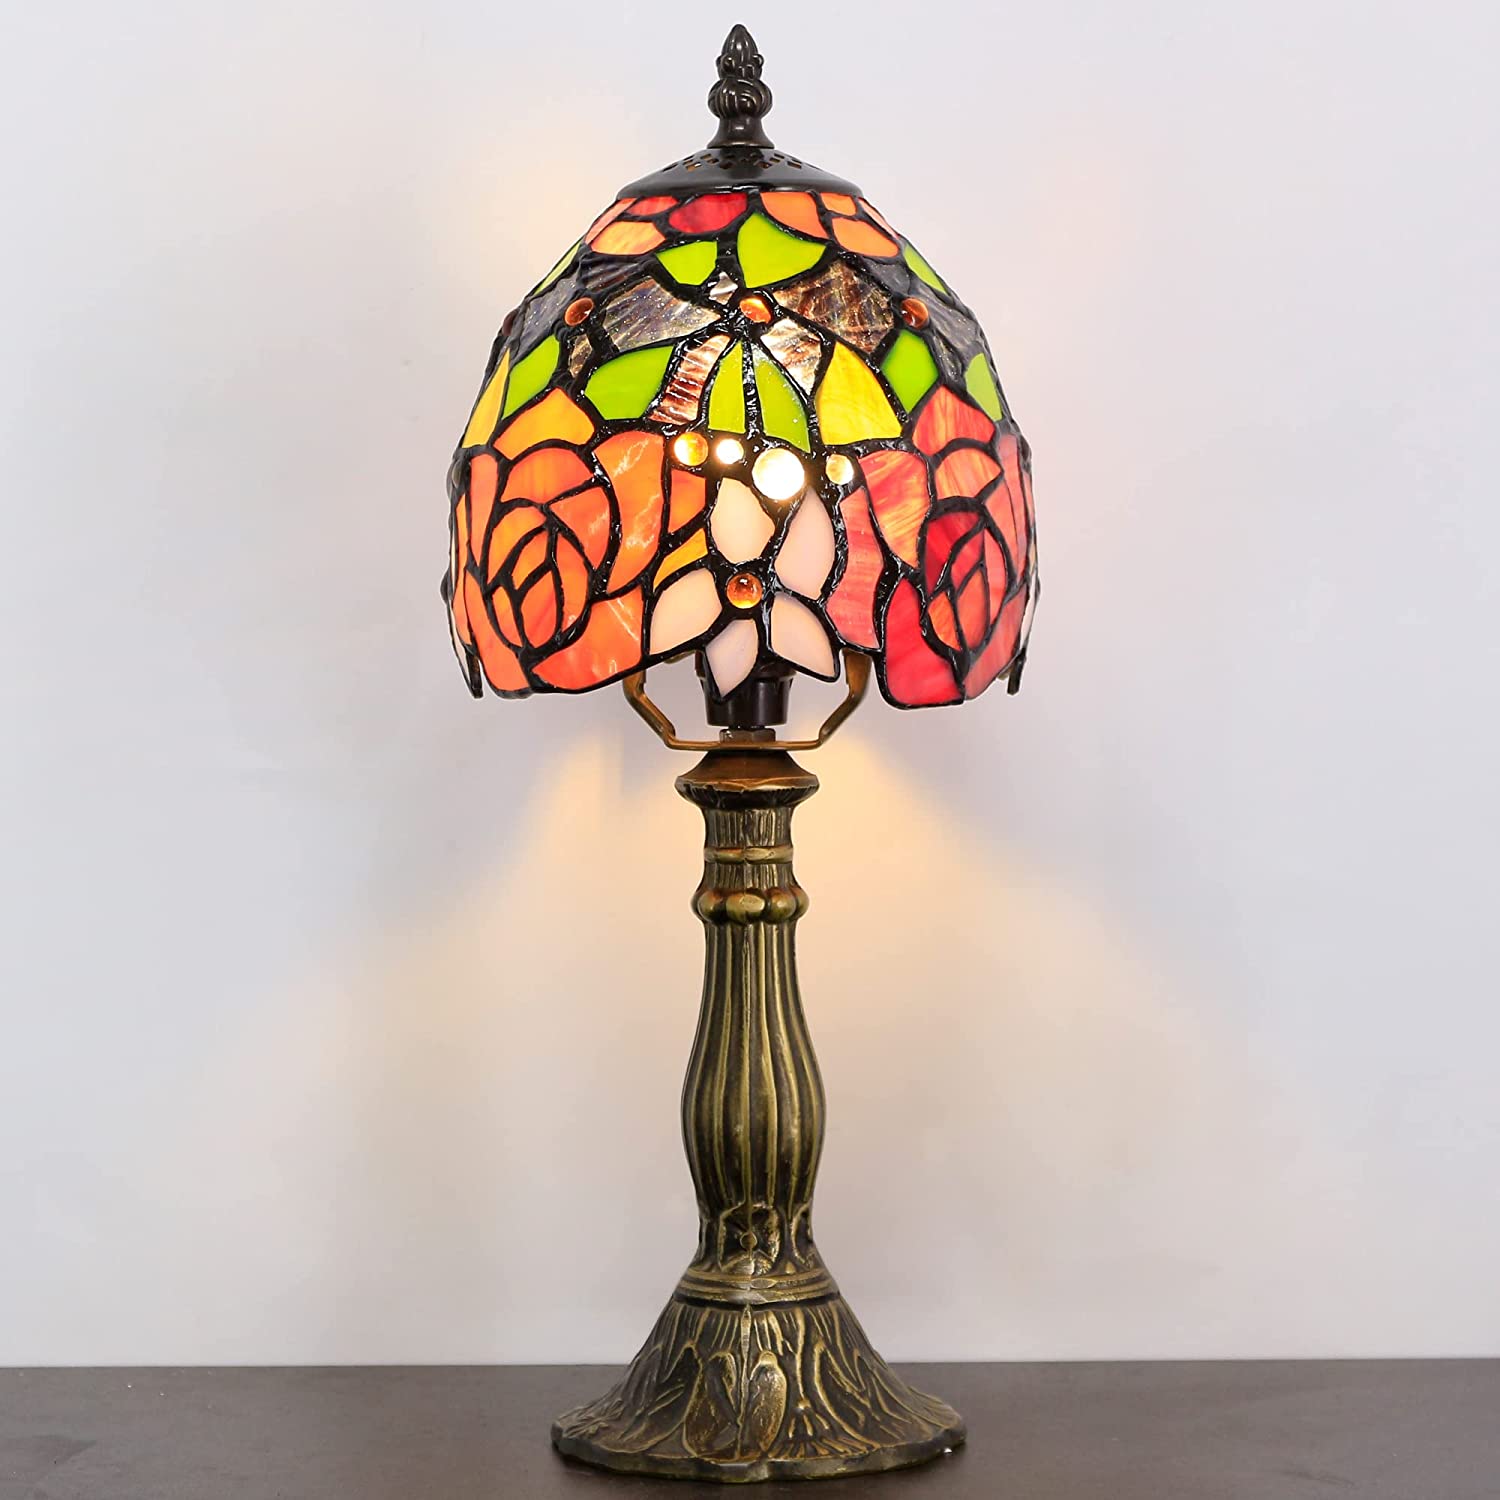 Werfactory® Small Tiffany Lamp Stained Glass Table Lamp Red Yellow Rose Style 14" Tall